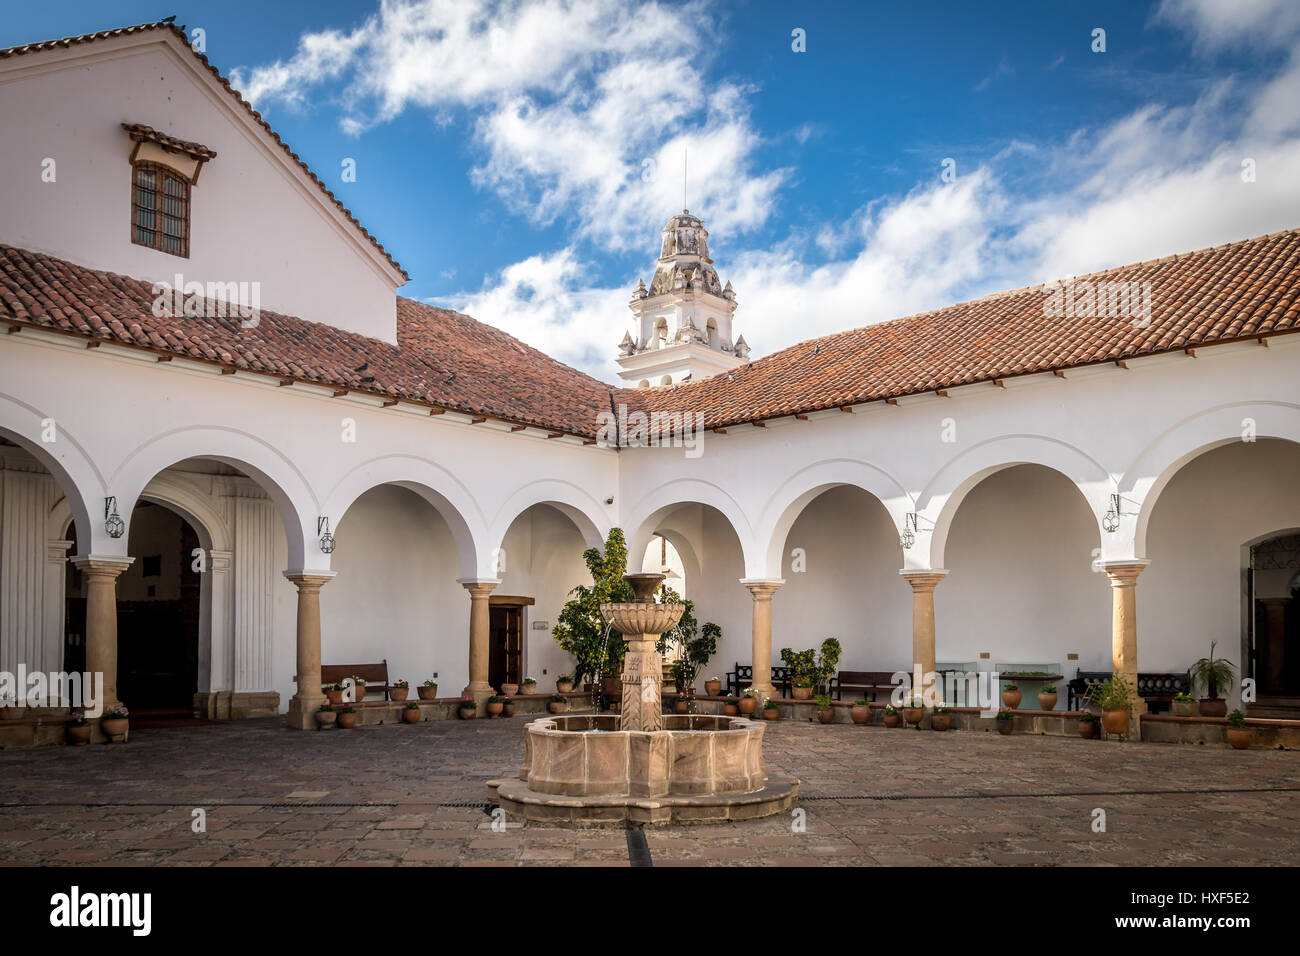 Courtyard in city of Sucre, Bolivia Stock Photo